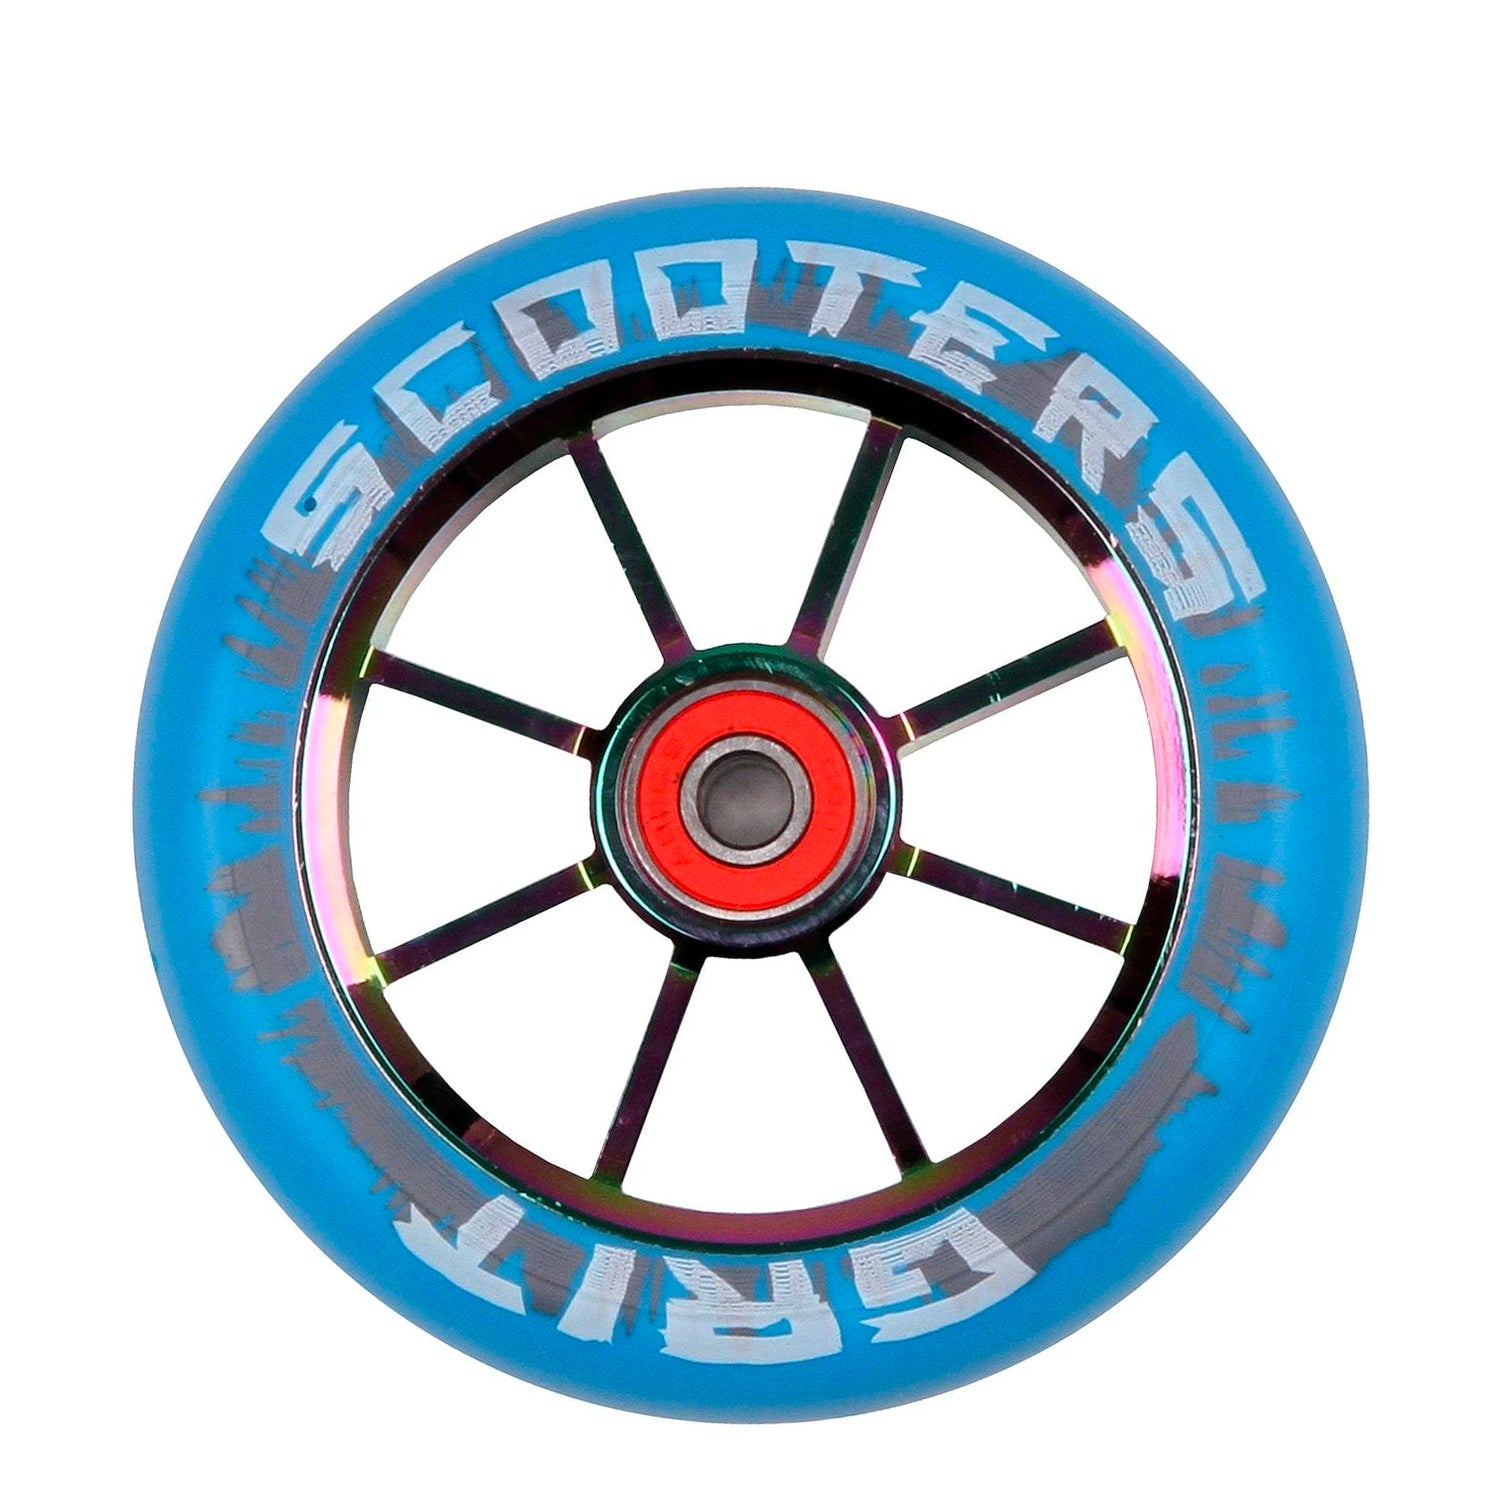 Grit 8 Spoke 100mm Scooter Wheel - Blue / Neo Chrome (x 2 Sold as a pair) - Prime Delux Store